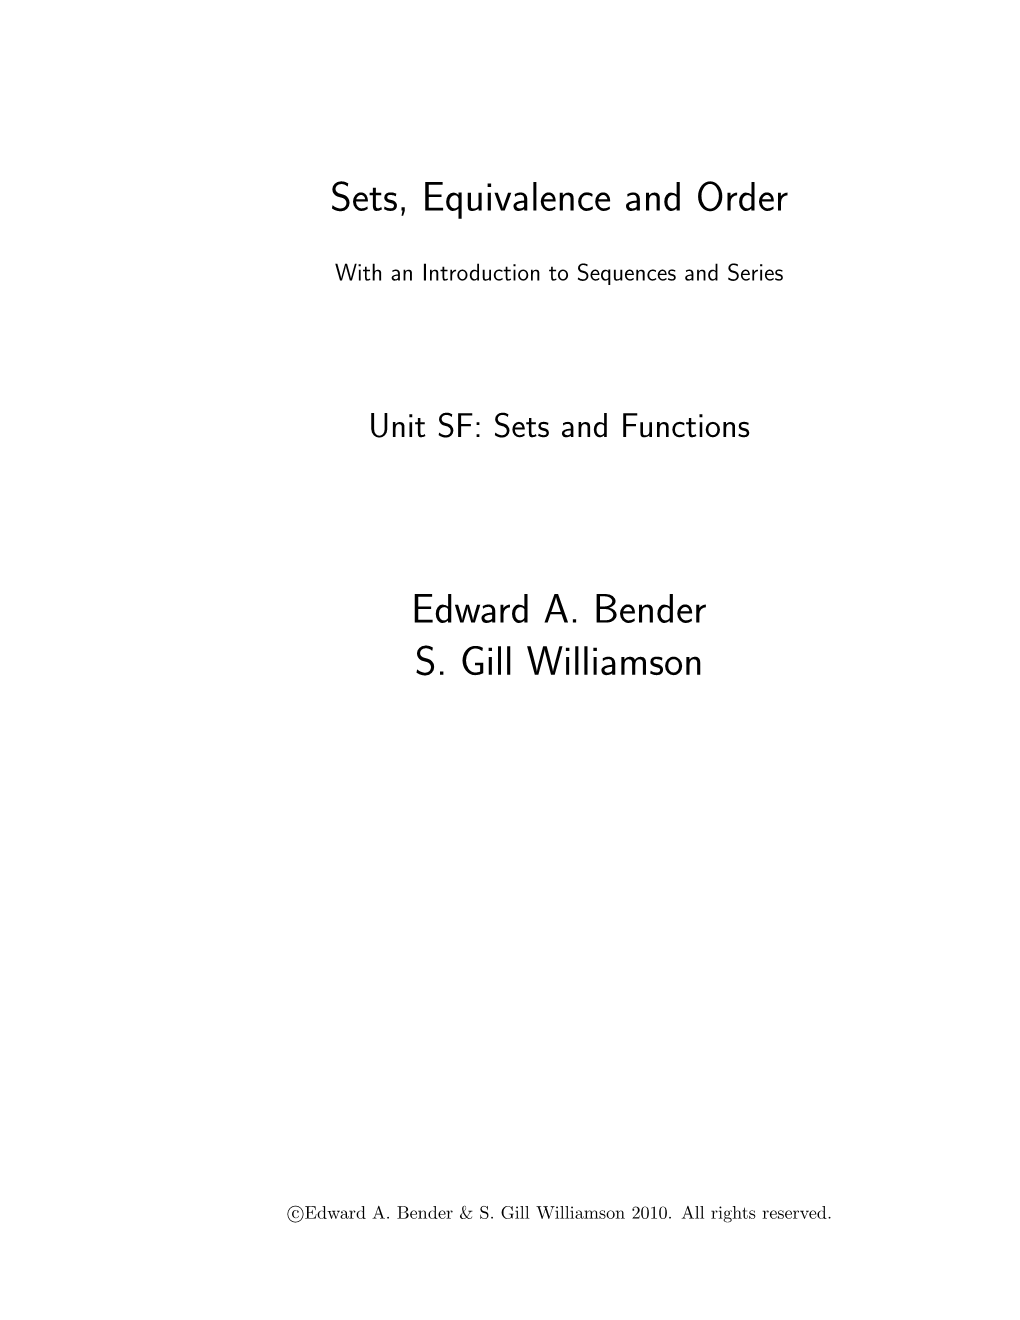 Sets, Equivalence and Order Edward A. Bender S. Gill Williamson